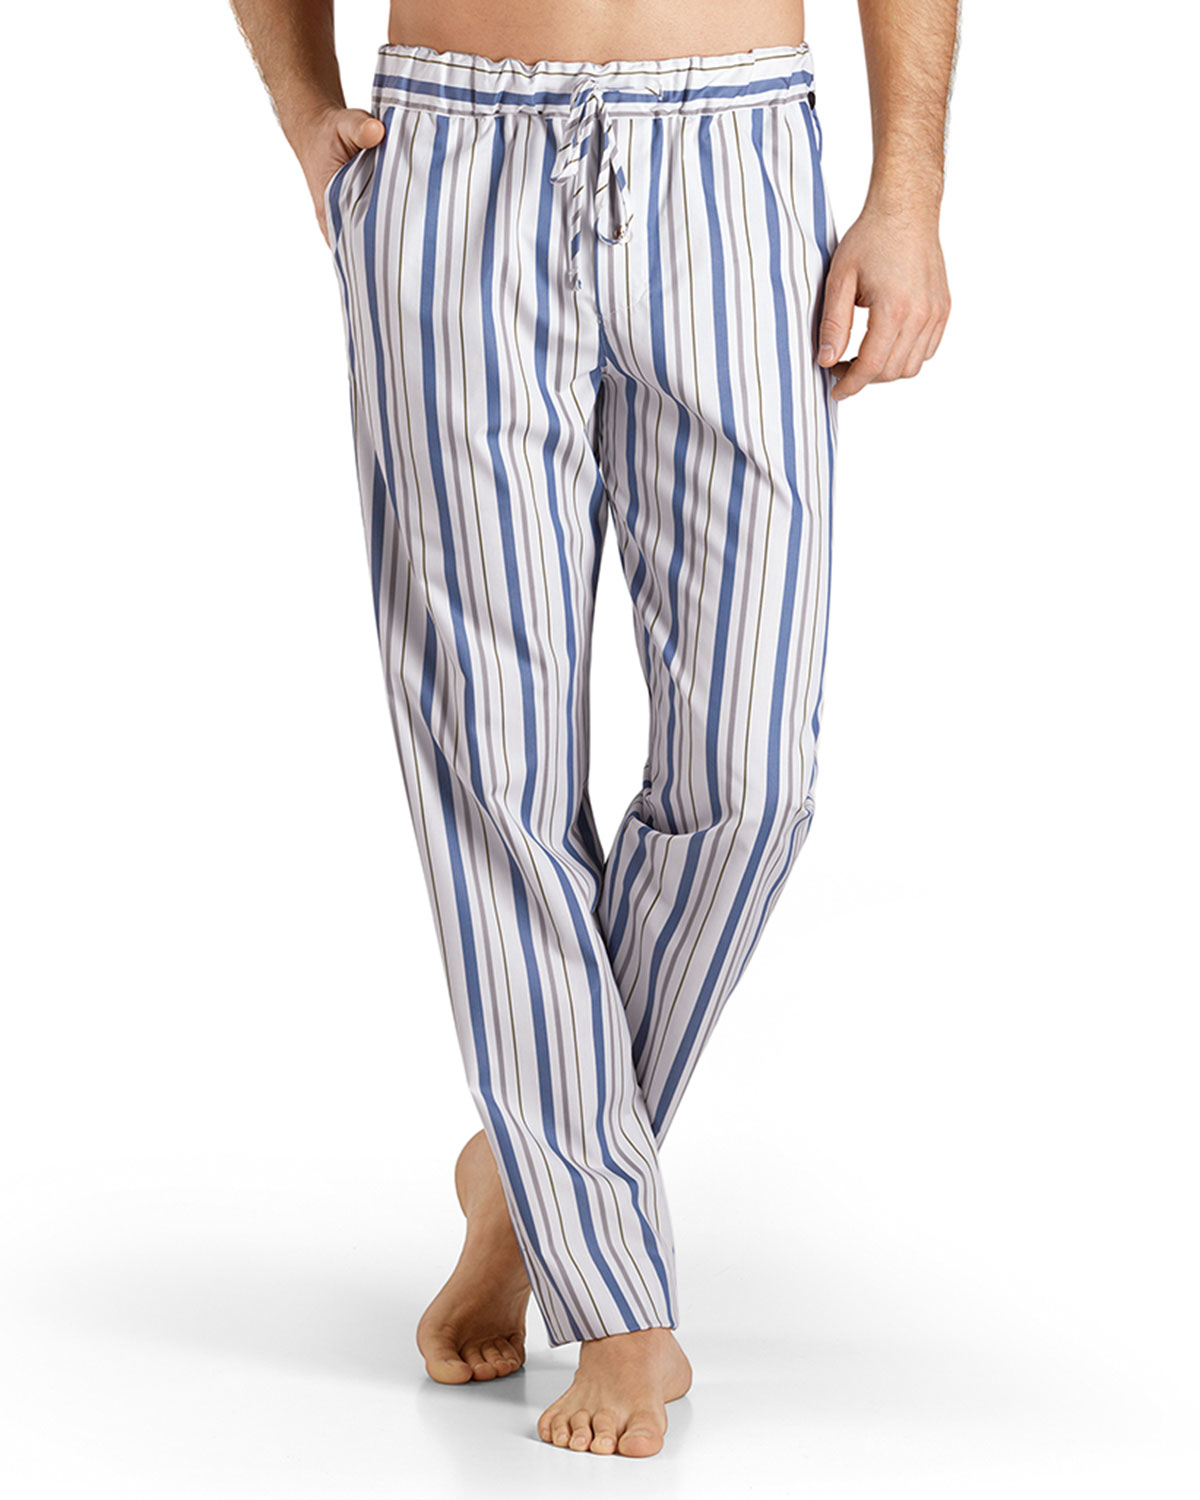 Hanro Cotton Alphonse Striped Lounge Pants in Blue for Men - Lyst